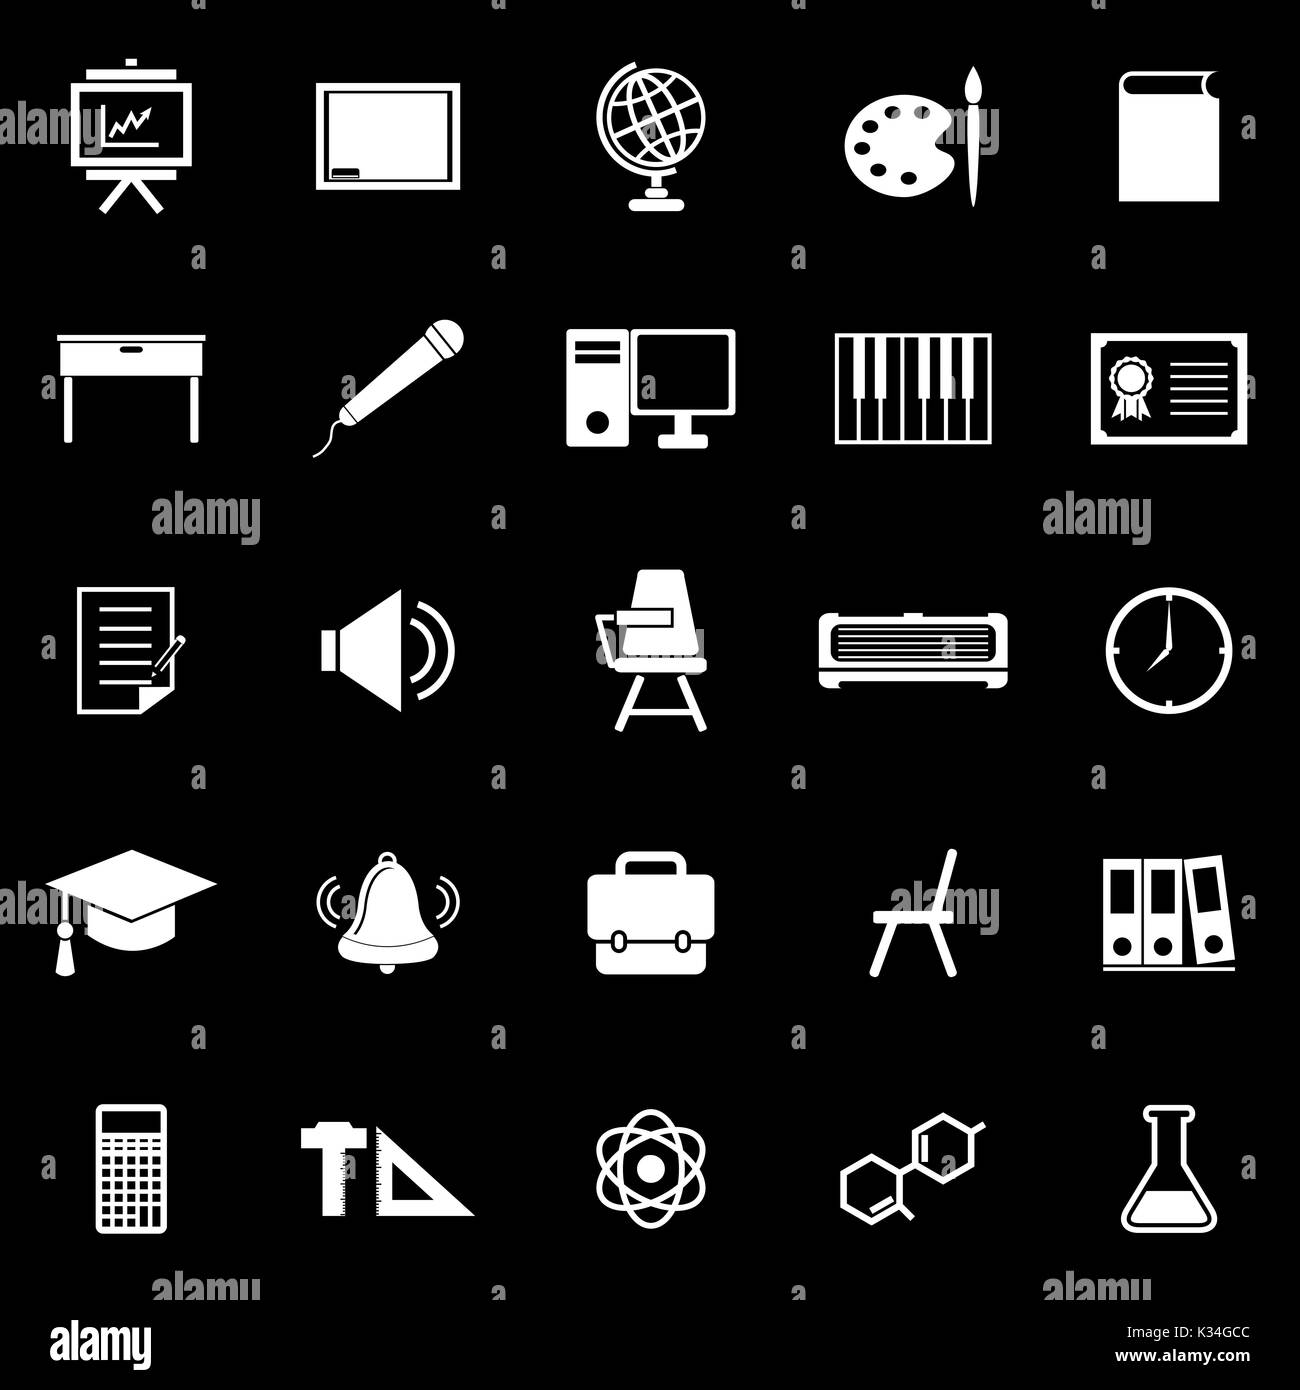 Classroom icons on black background, stock vector Stock Vector